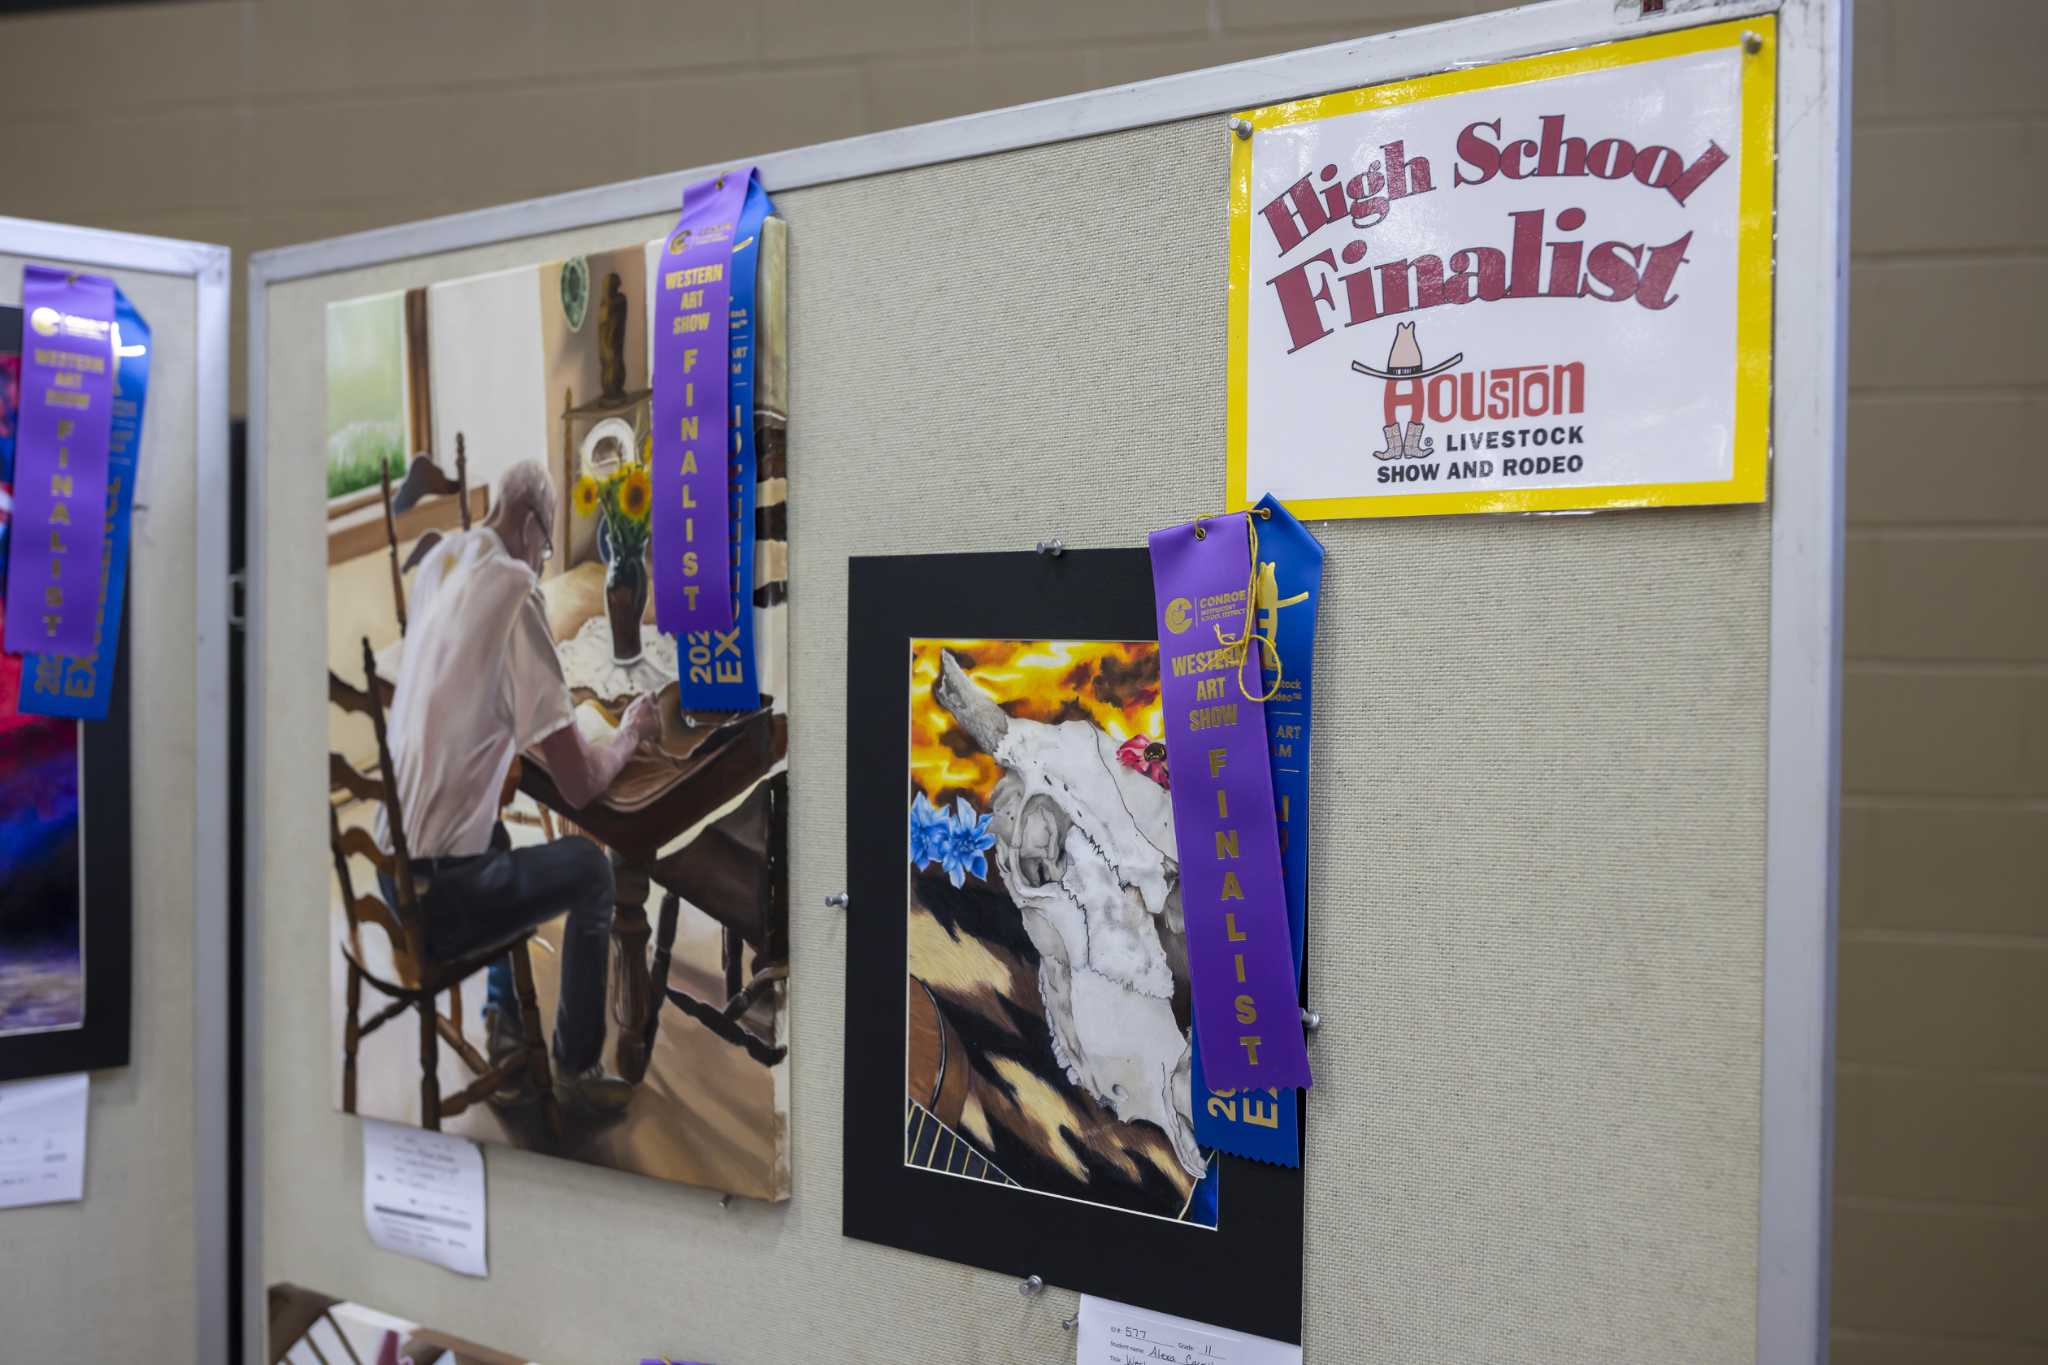 Conroe ISD’s Western Art Show surprises young sisters